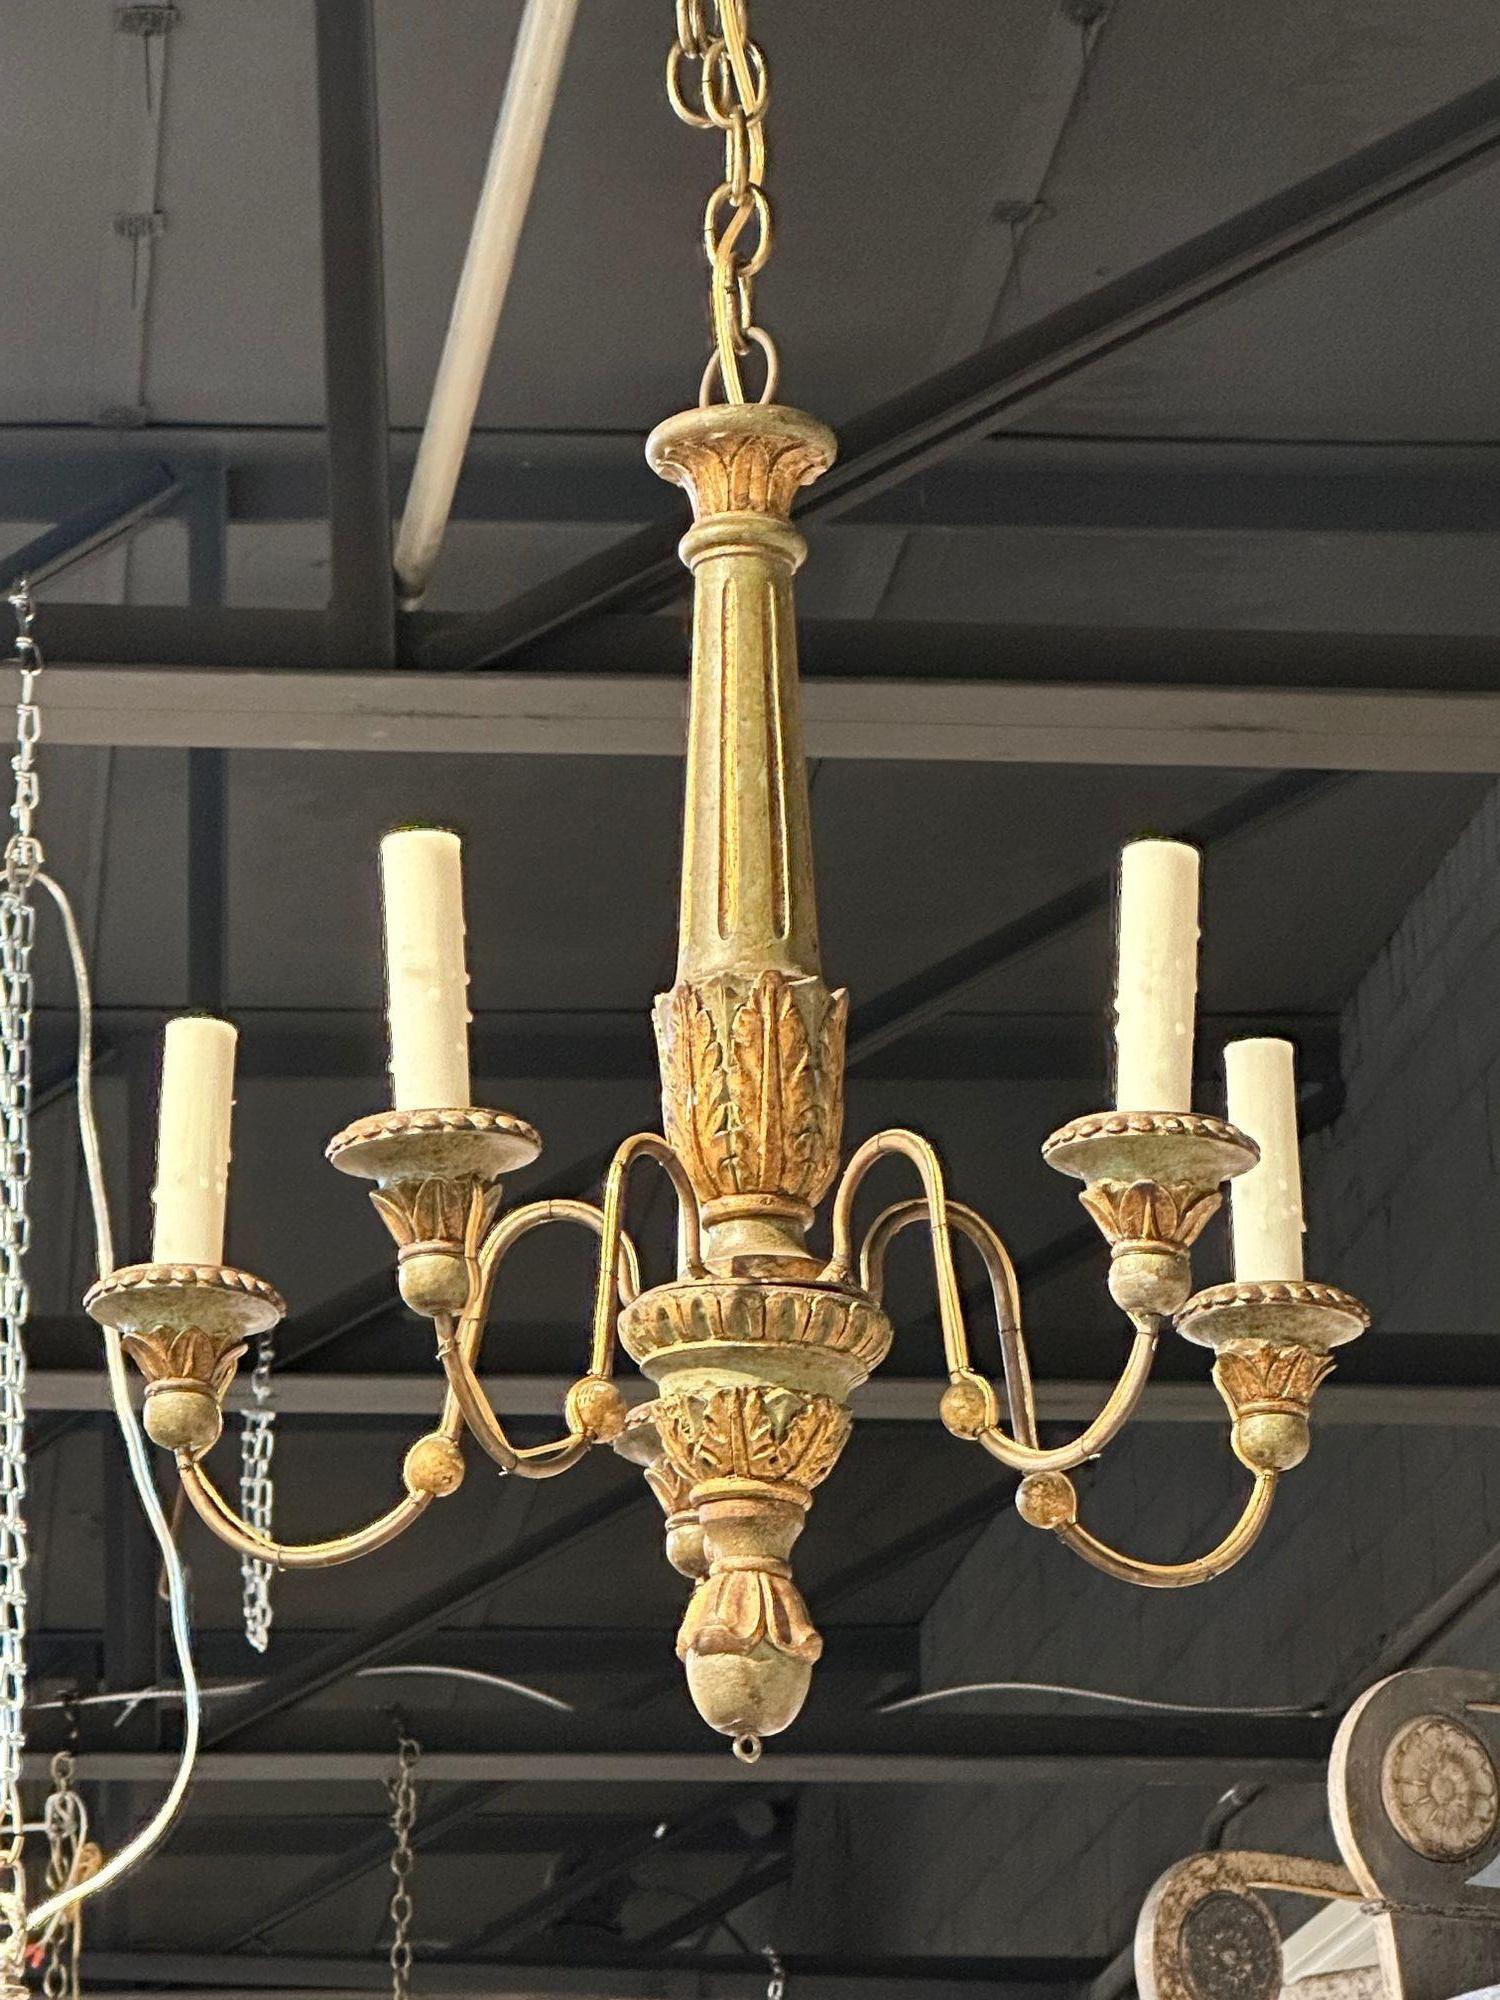 Lovely antique Italian giltwood chandelier. Very elegant for a smaller space! So pretty!